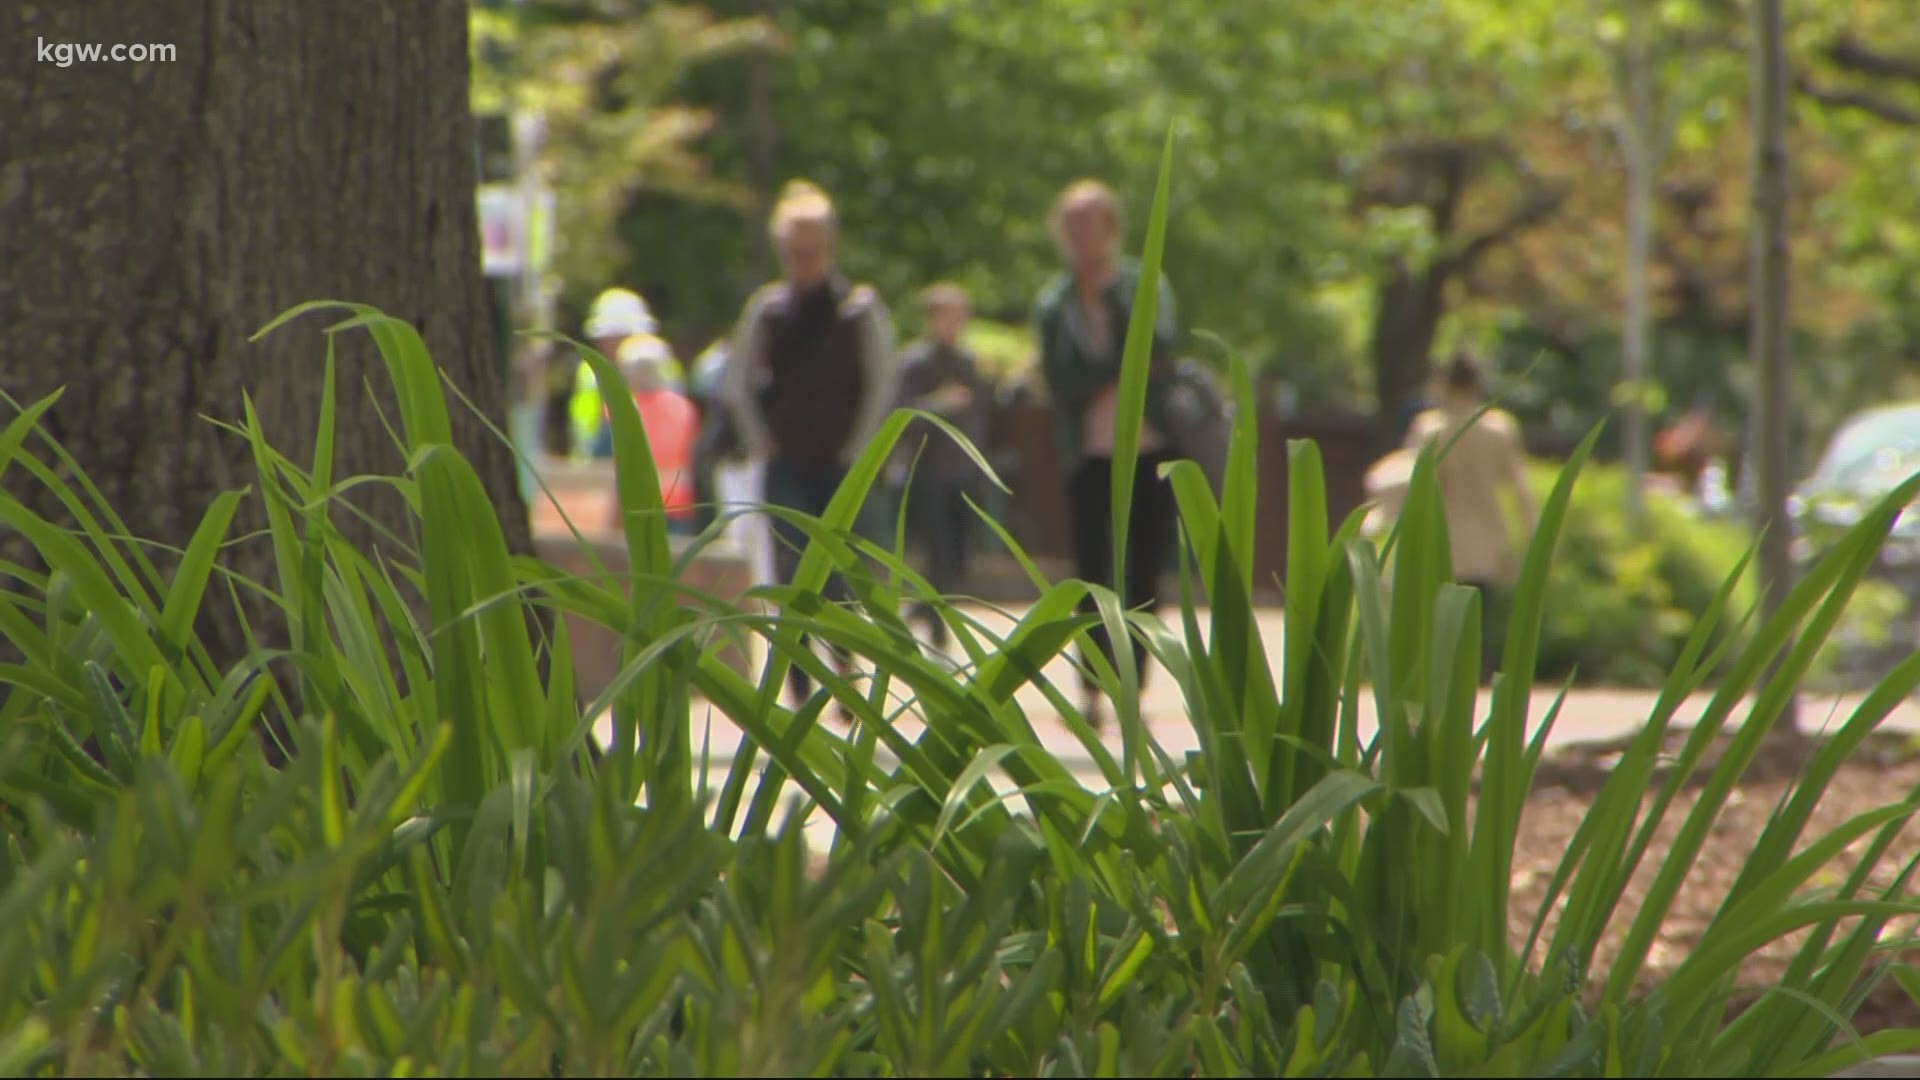 More than 200 University of Oregon students have tested positive for COVID-19. Pat Dooris has the latest.